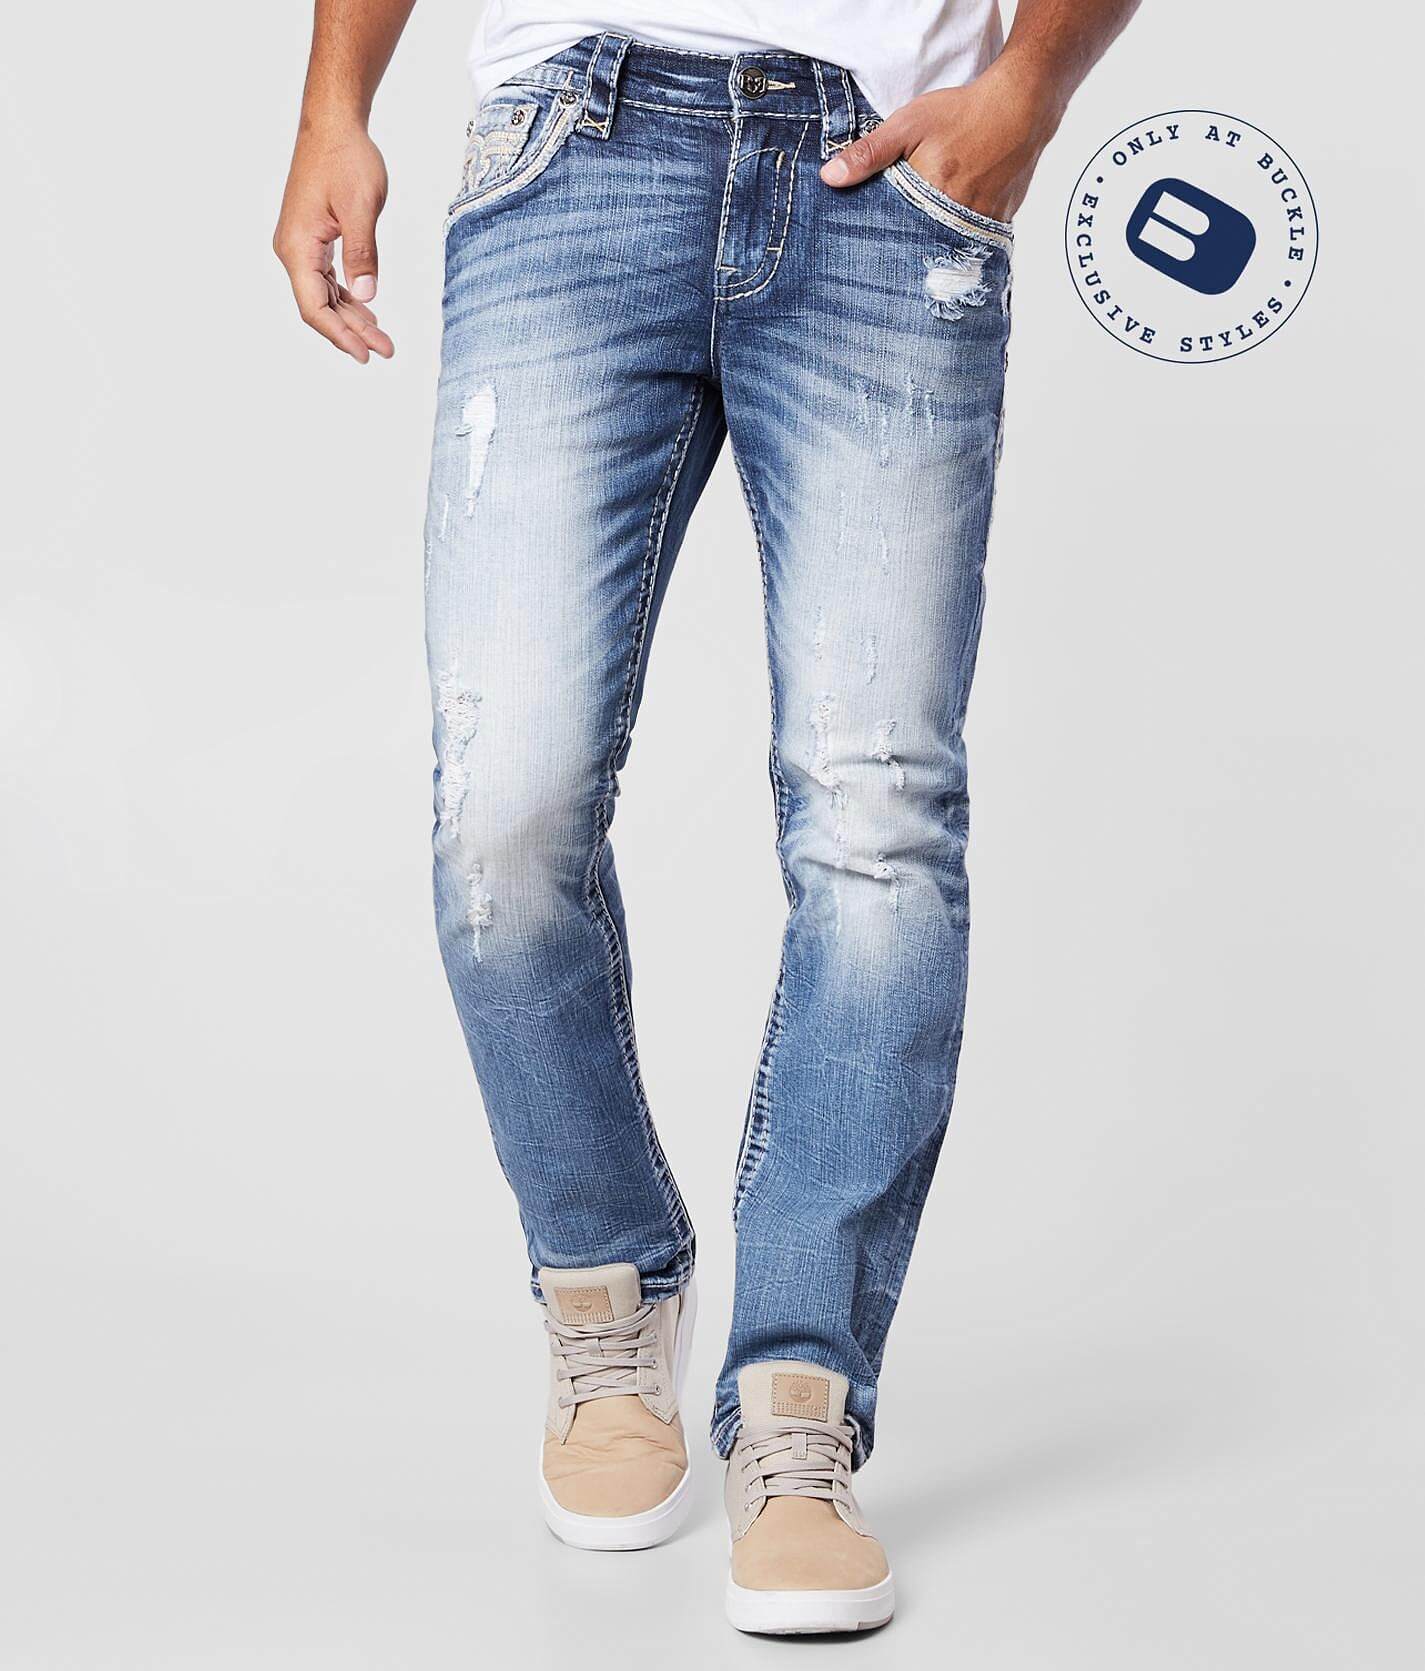 rock revival straight jeans